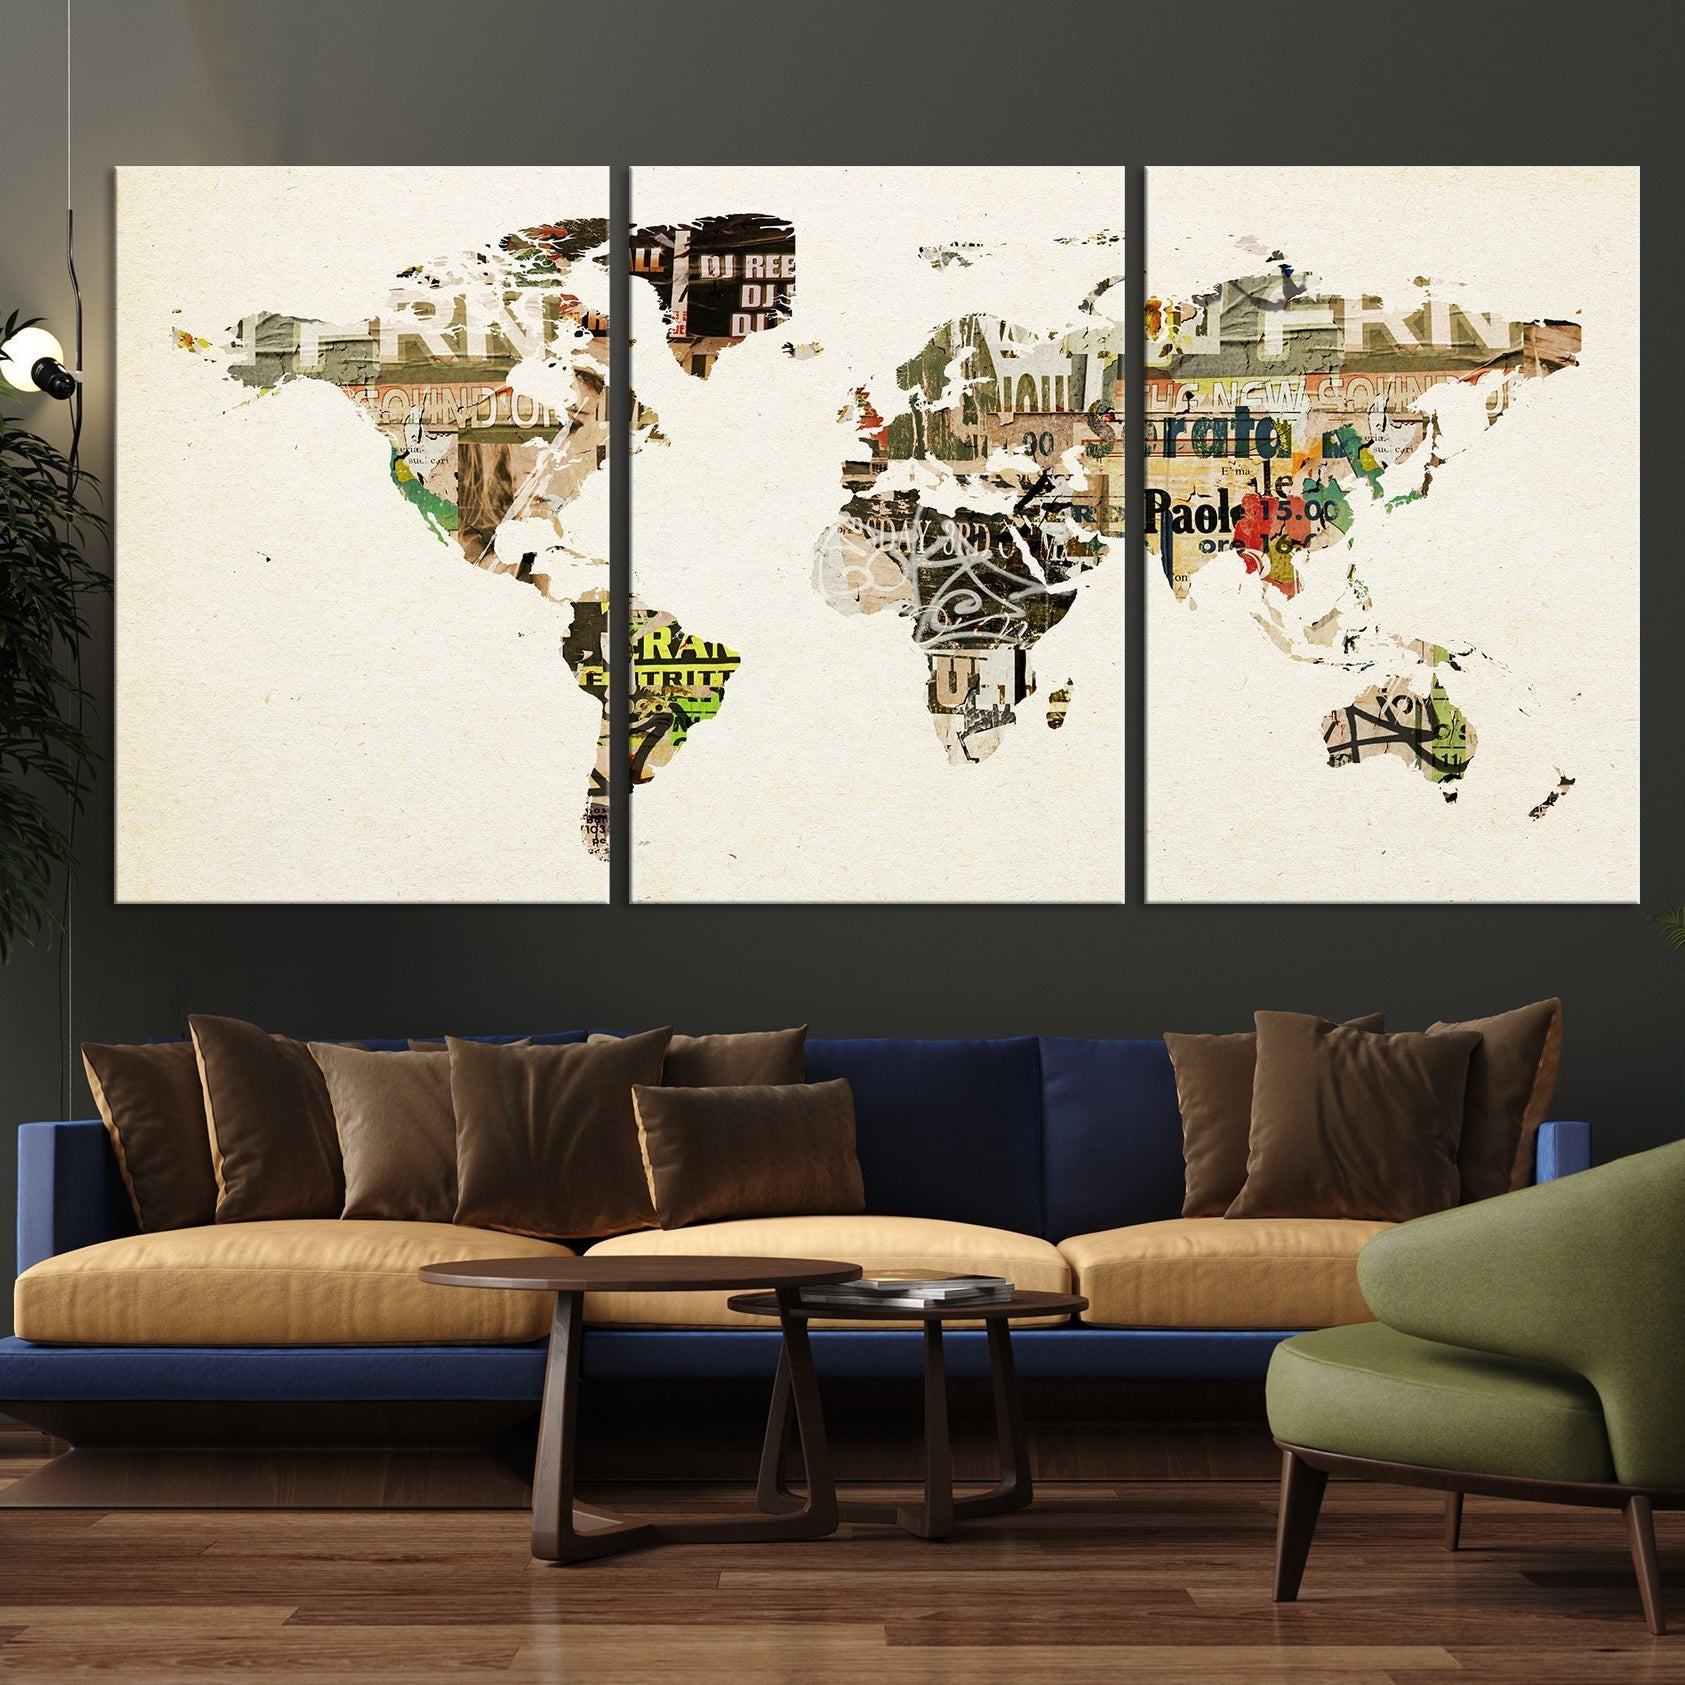 World Map with Grunge Posters Large Canvas Art Print, World Map for Home Art Print No:022-Giclee Canvas Print-World Map Wall Art-3 Panel-Per P. 16x24-Extra Large Wall Art Canvas Print